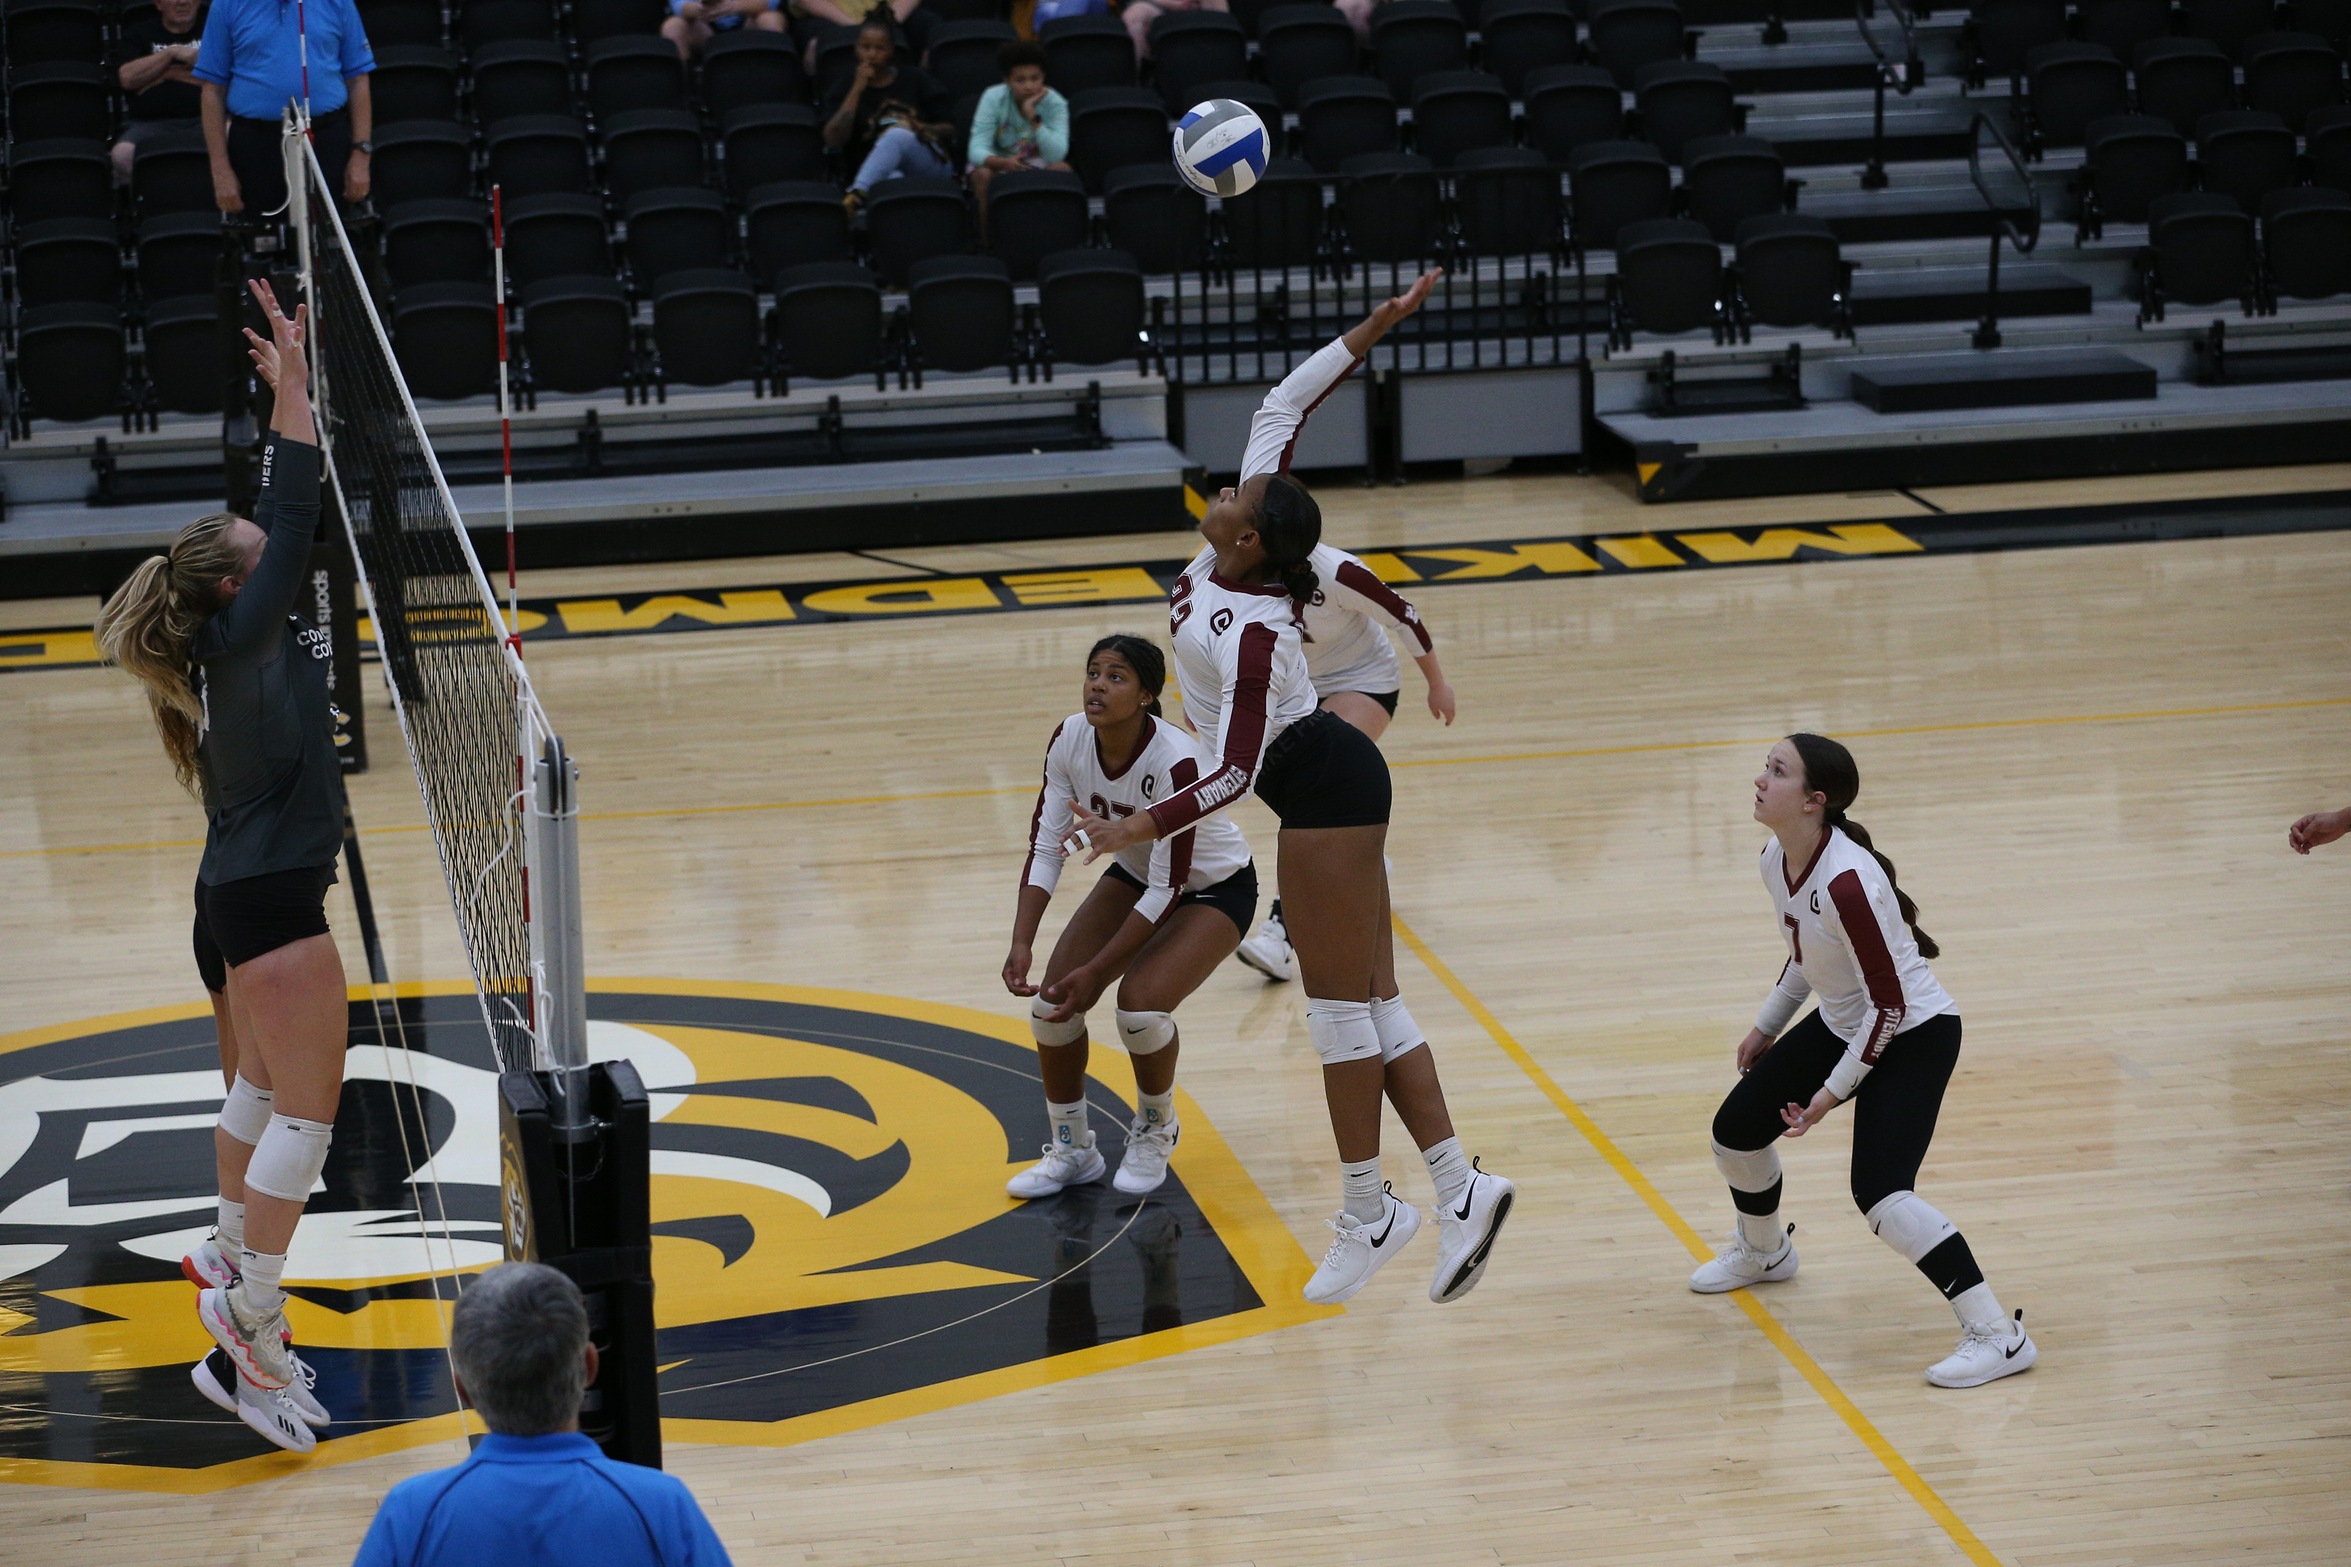 The Ladies will face Texas Lutheran on Saturday in their final match of the weekend. 

PHOTO: Charlie Lengal III